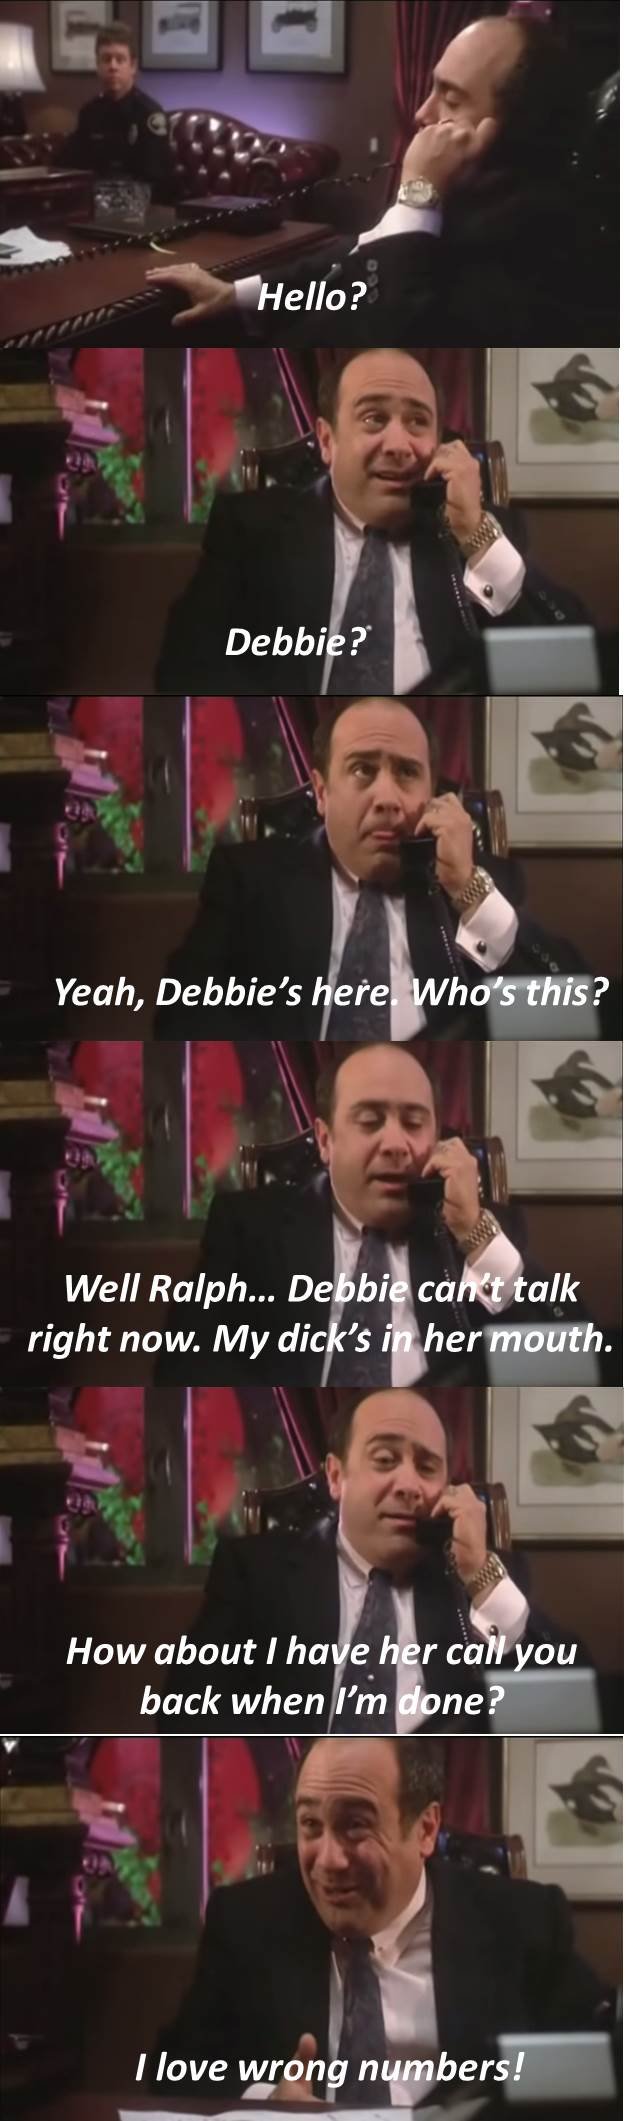 My favorite Danny Devito line ever. music - . Yeah, Debbie' s has ? right no w. My dicks I her mouth. hack when Fm I a ? I love worong retrievers'.. Danny Devito is my hero